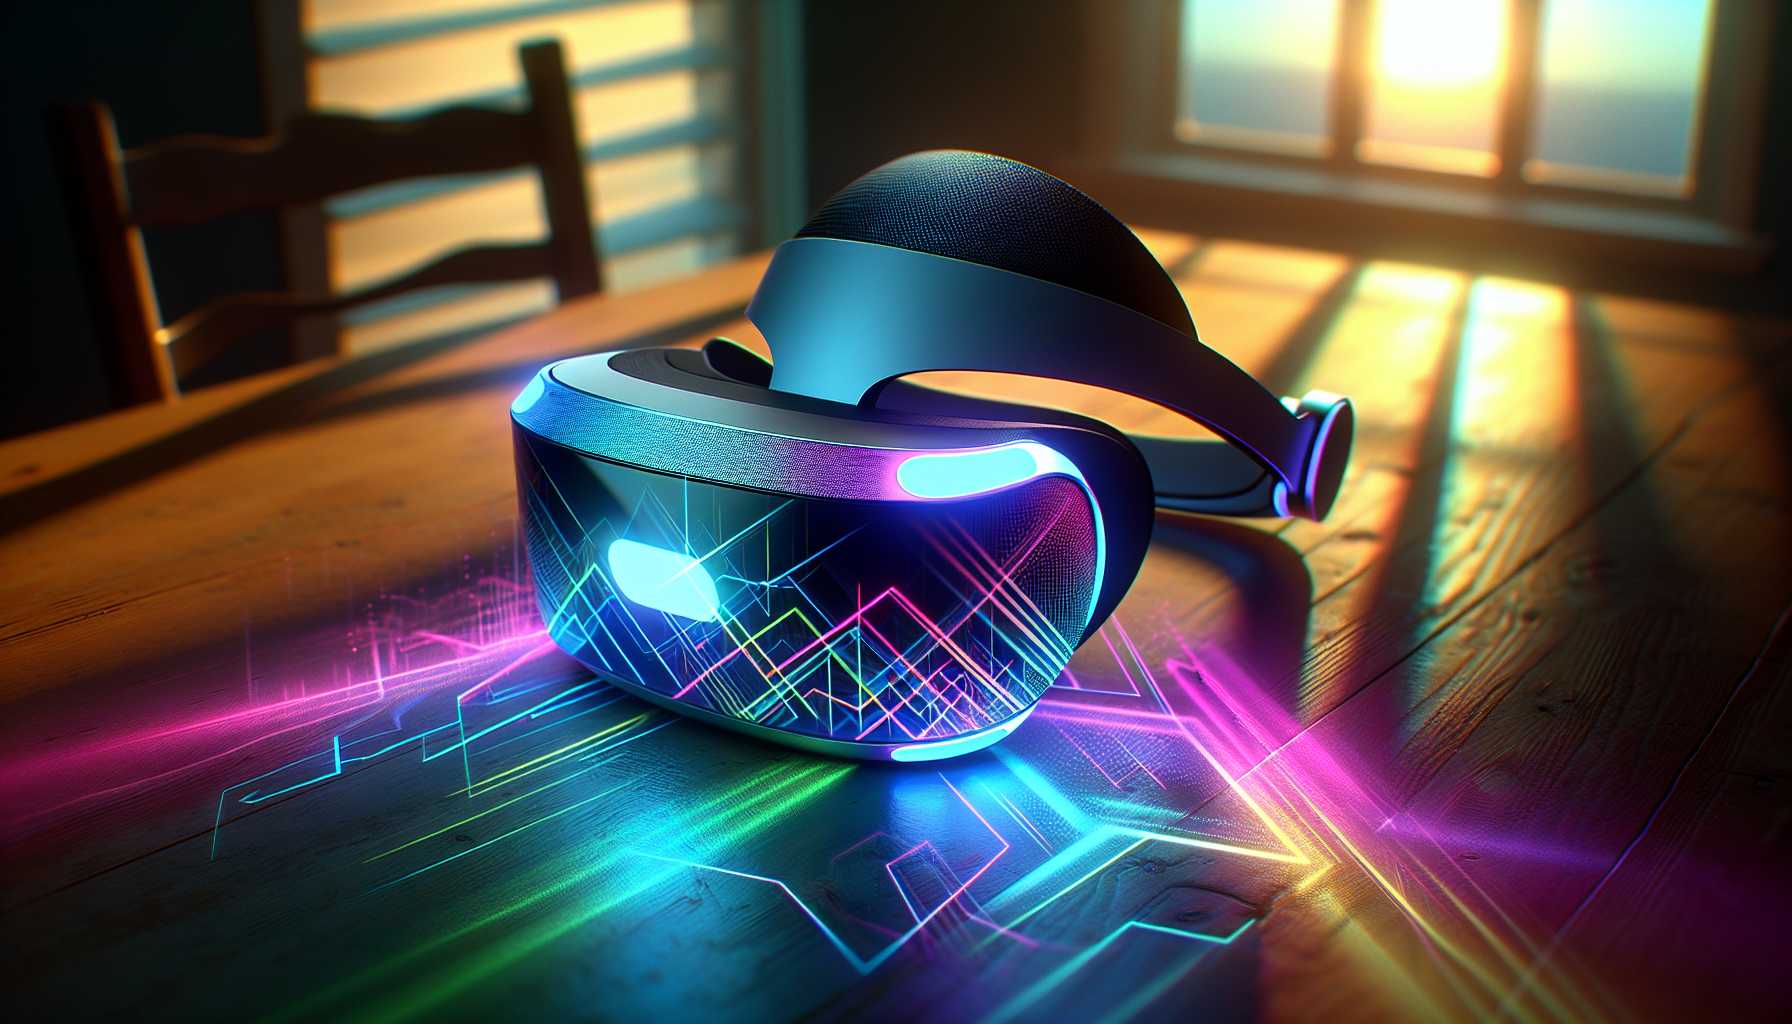 Mixed reality headset with virtual and physical elements coalescing